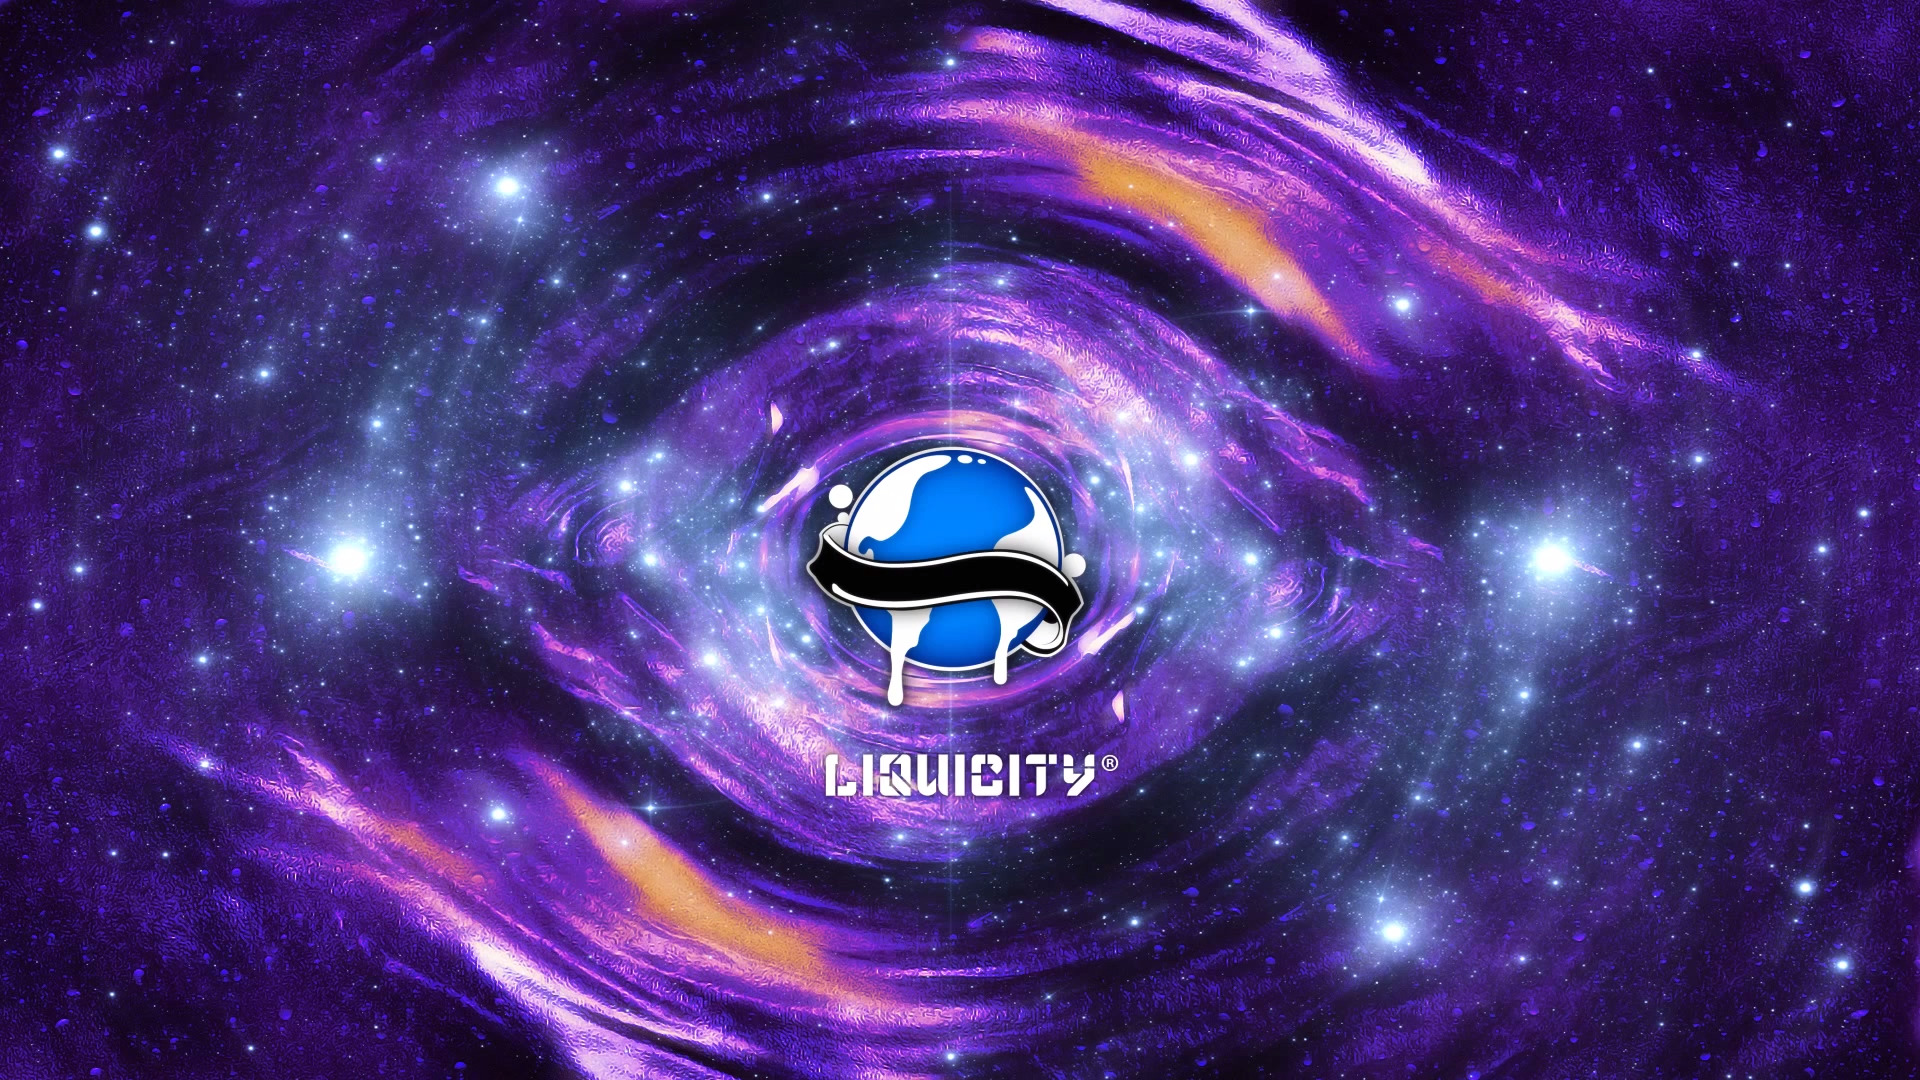 Liquicity, Space, Sky, Colorful Wallpaper